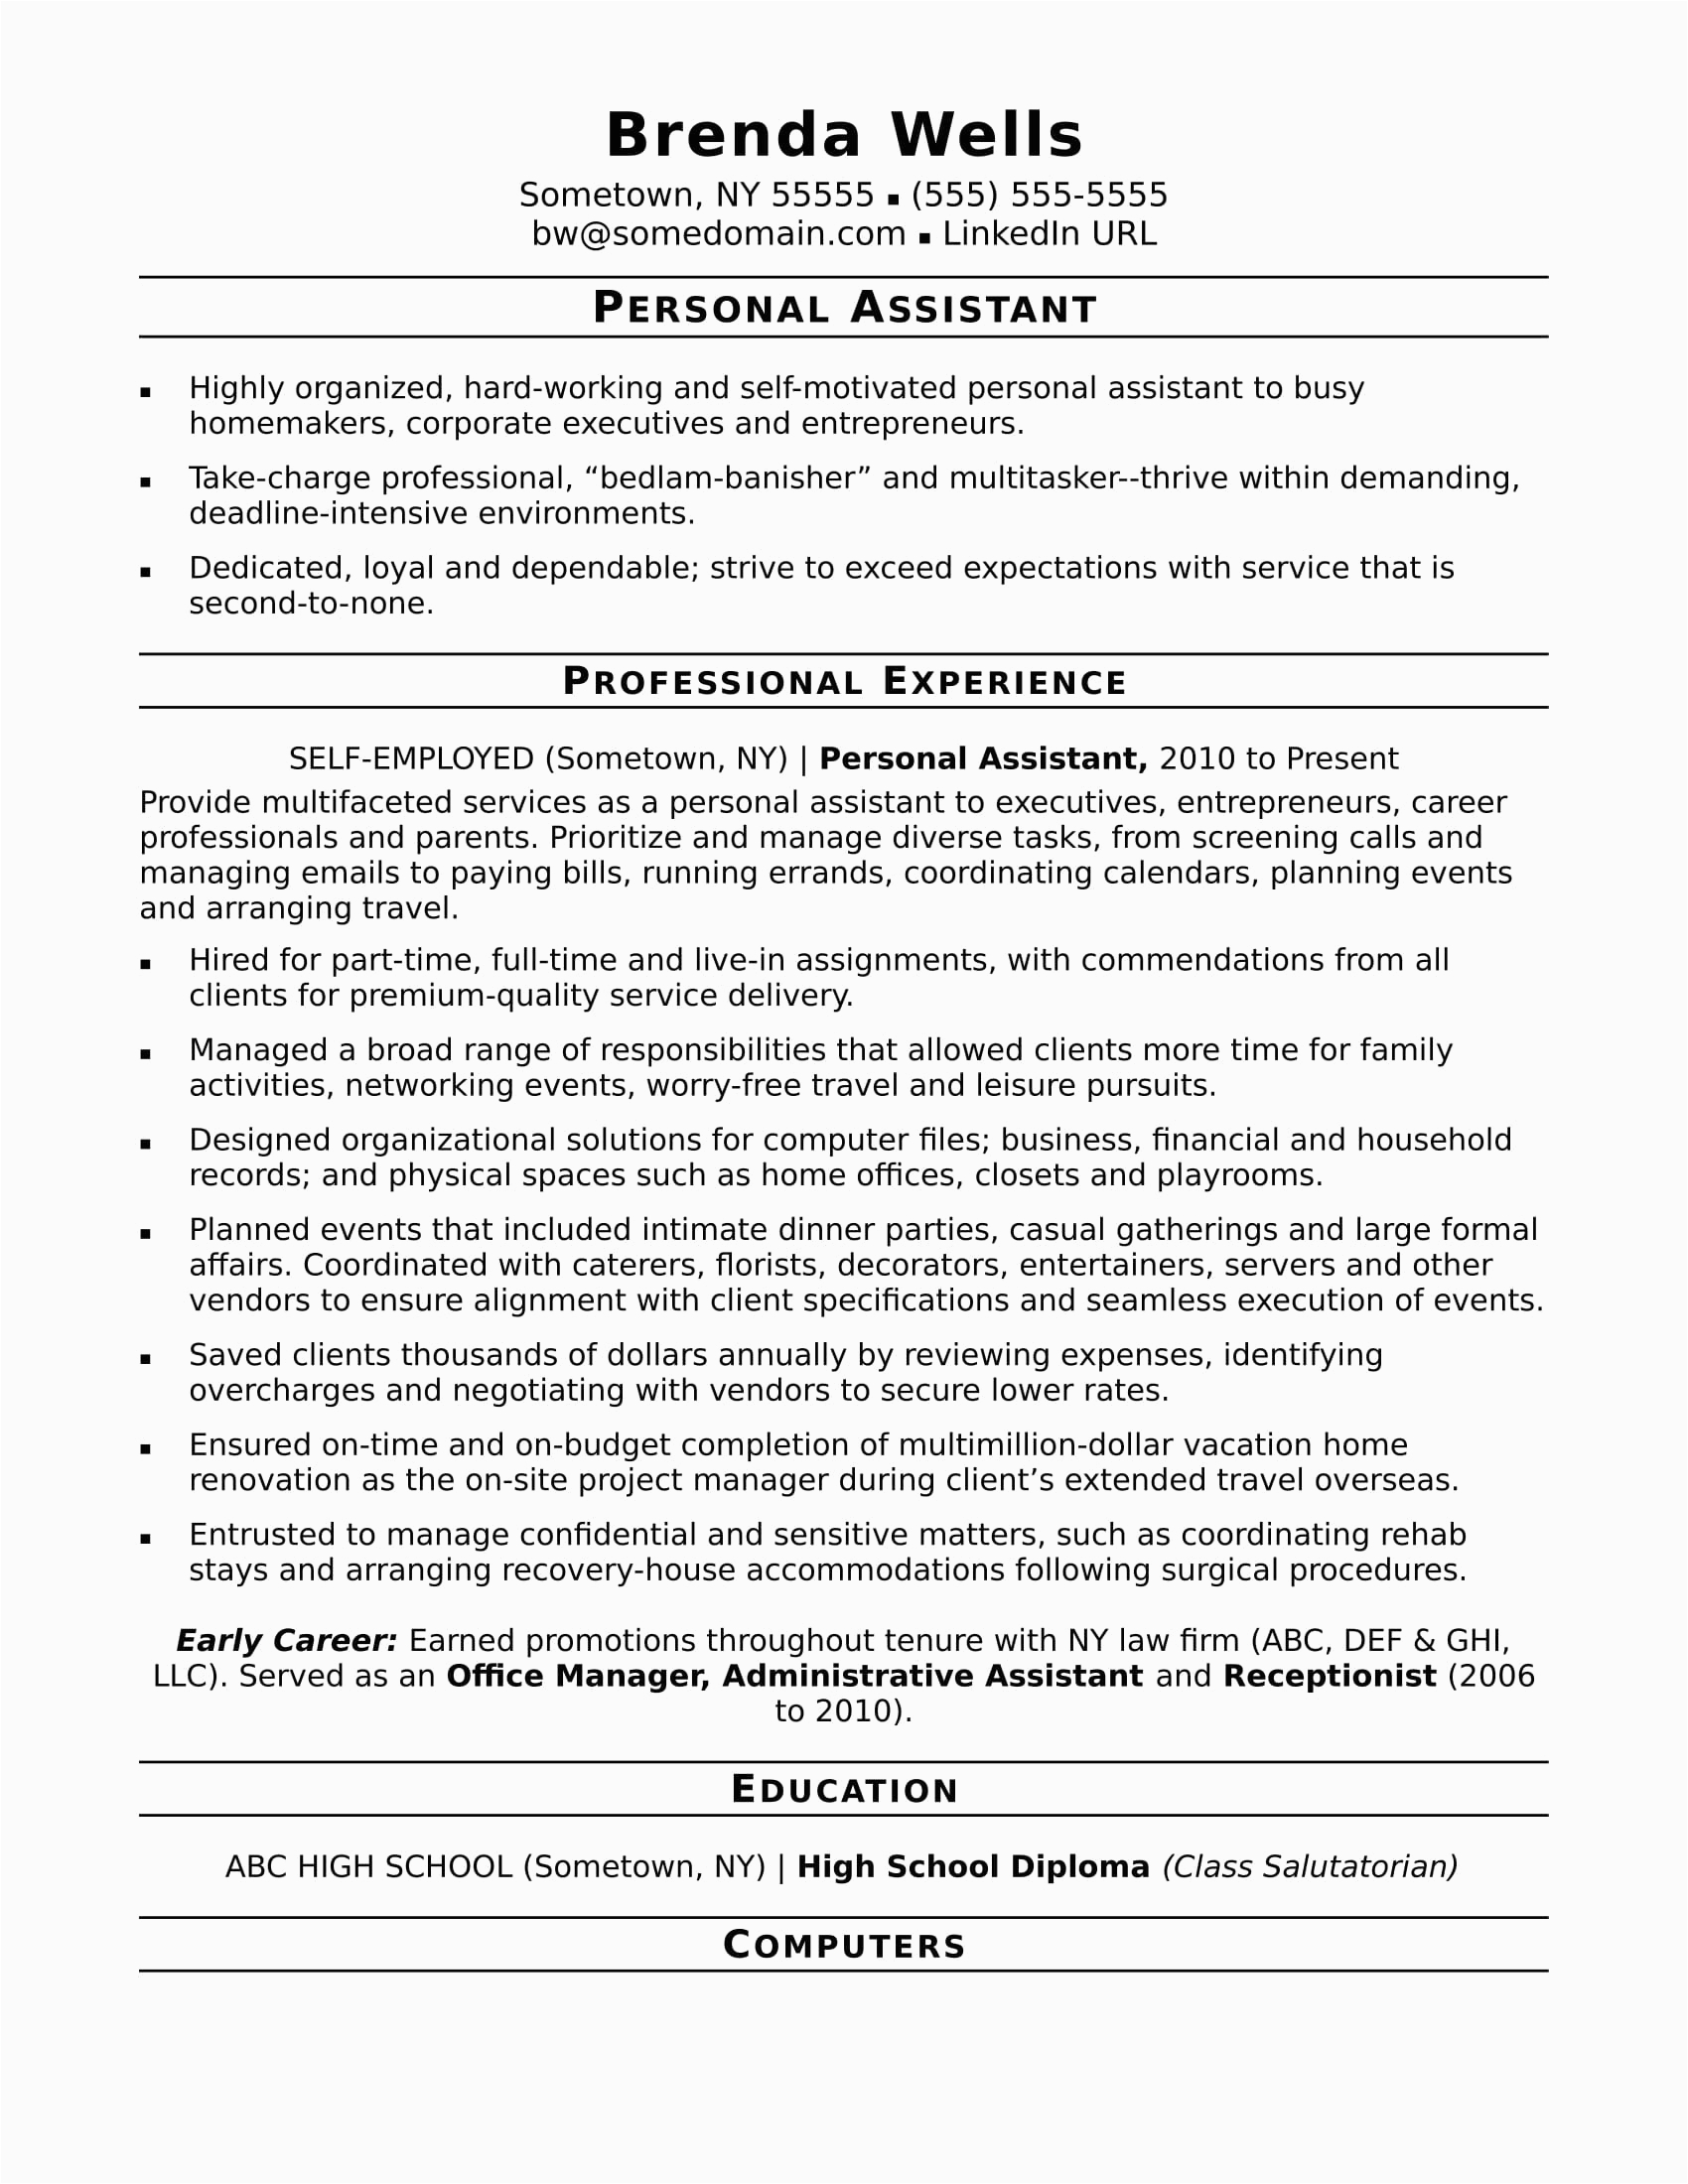 Sample Resume for Personal assistant to Ceo Sample Resume Executive Personal assistant Ceo Personal